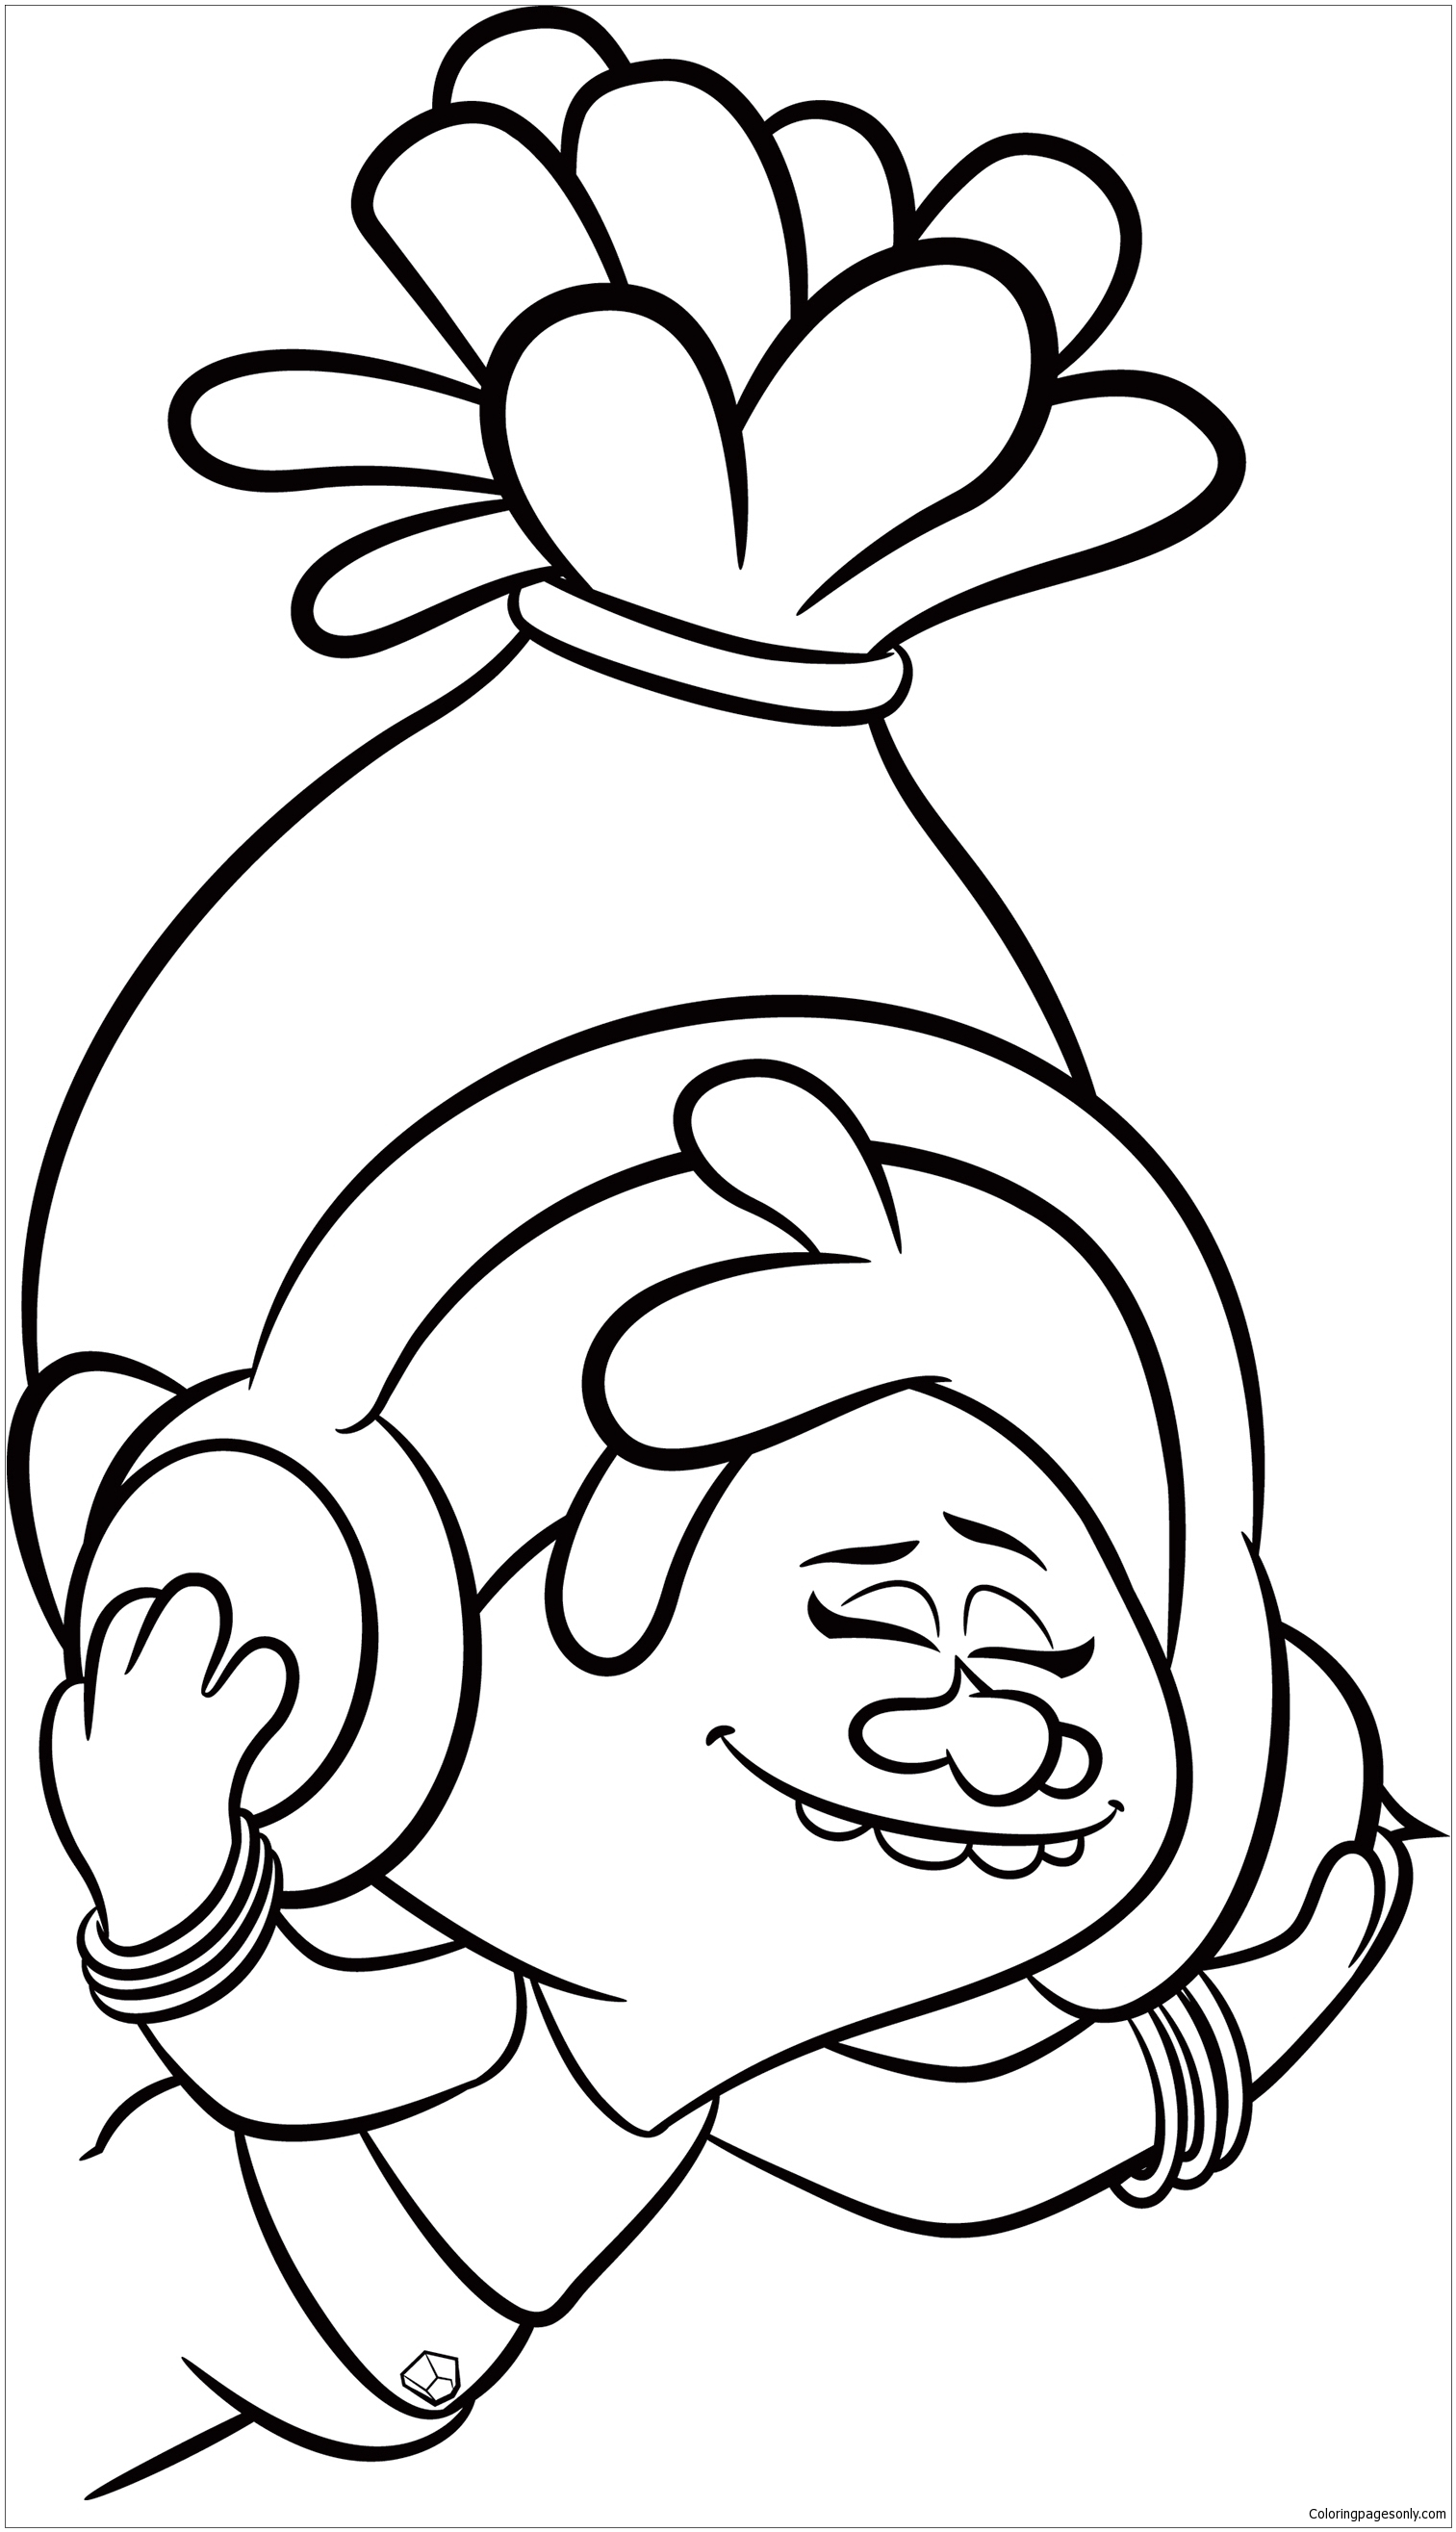 Trolls Movie Coloring Pages Trolls Movie Coloring Page Free Coloring Pages Online